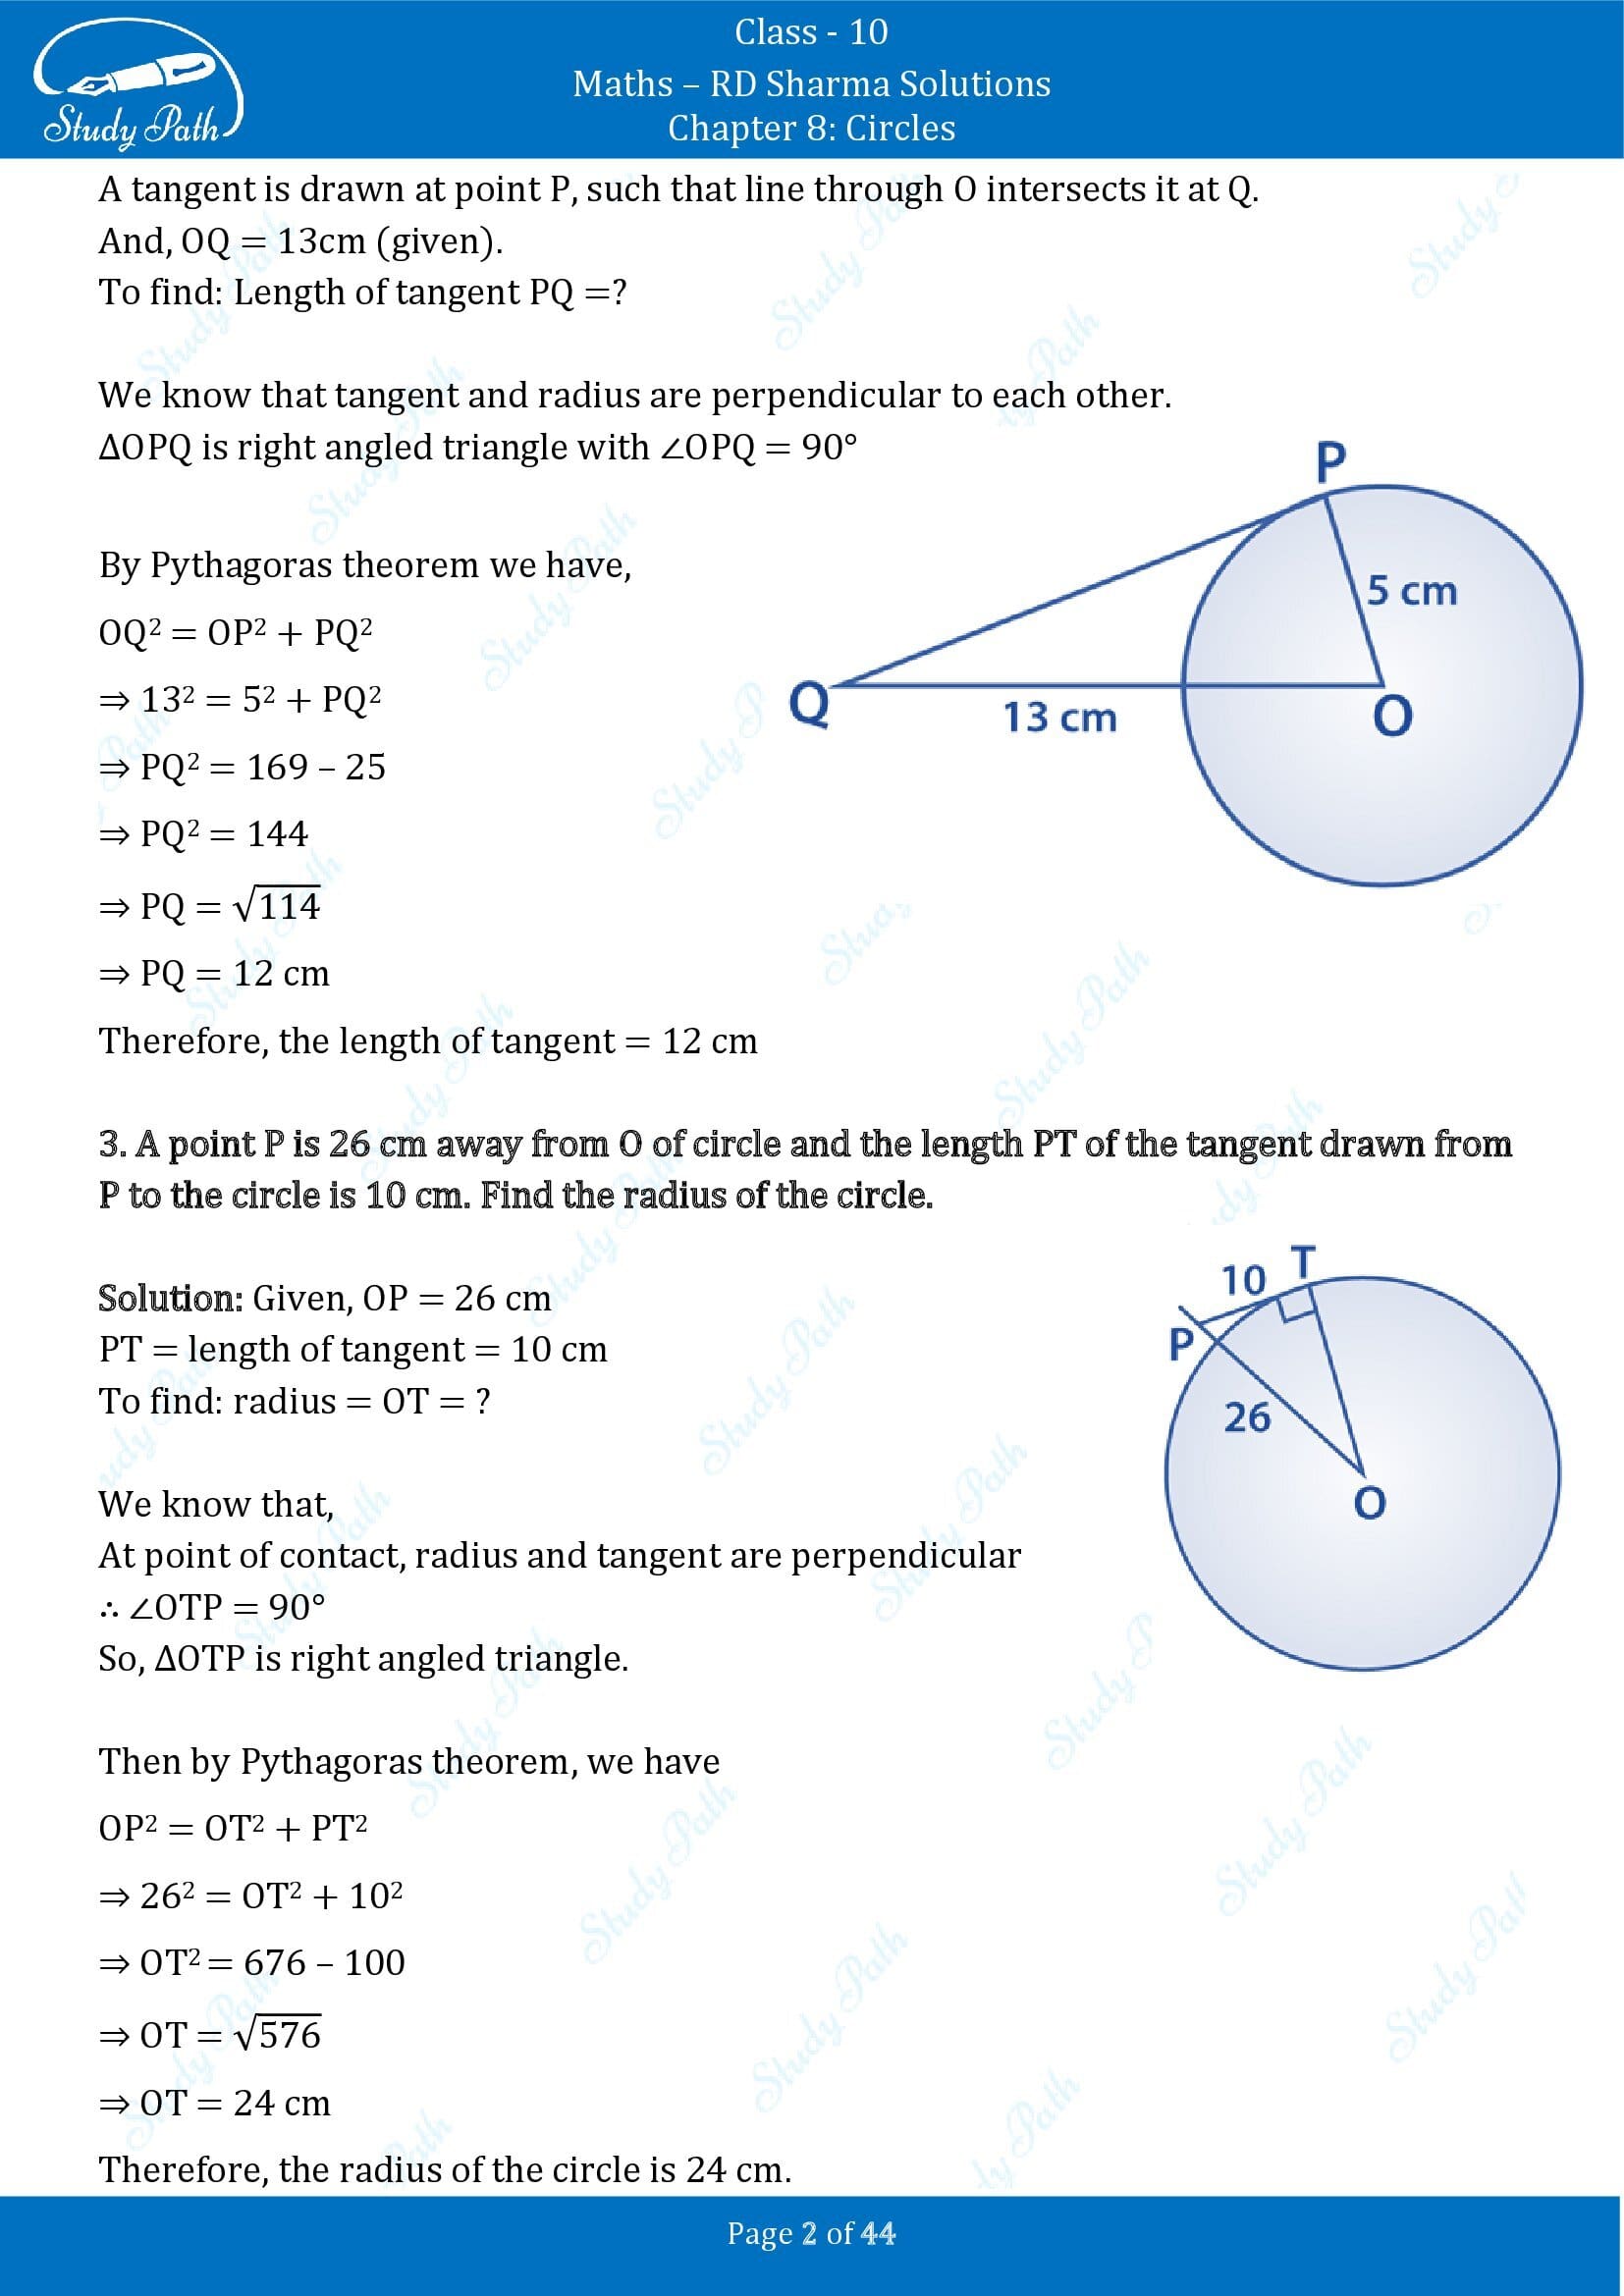 RD Sharma Solutions Class 10 Chapter 8 Circles Exercise 8.2 00002